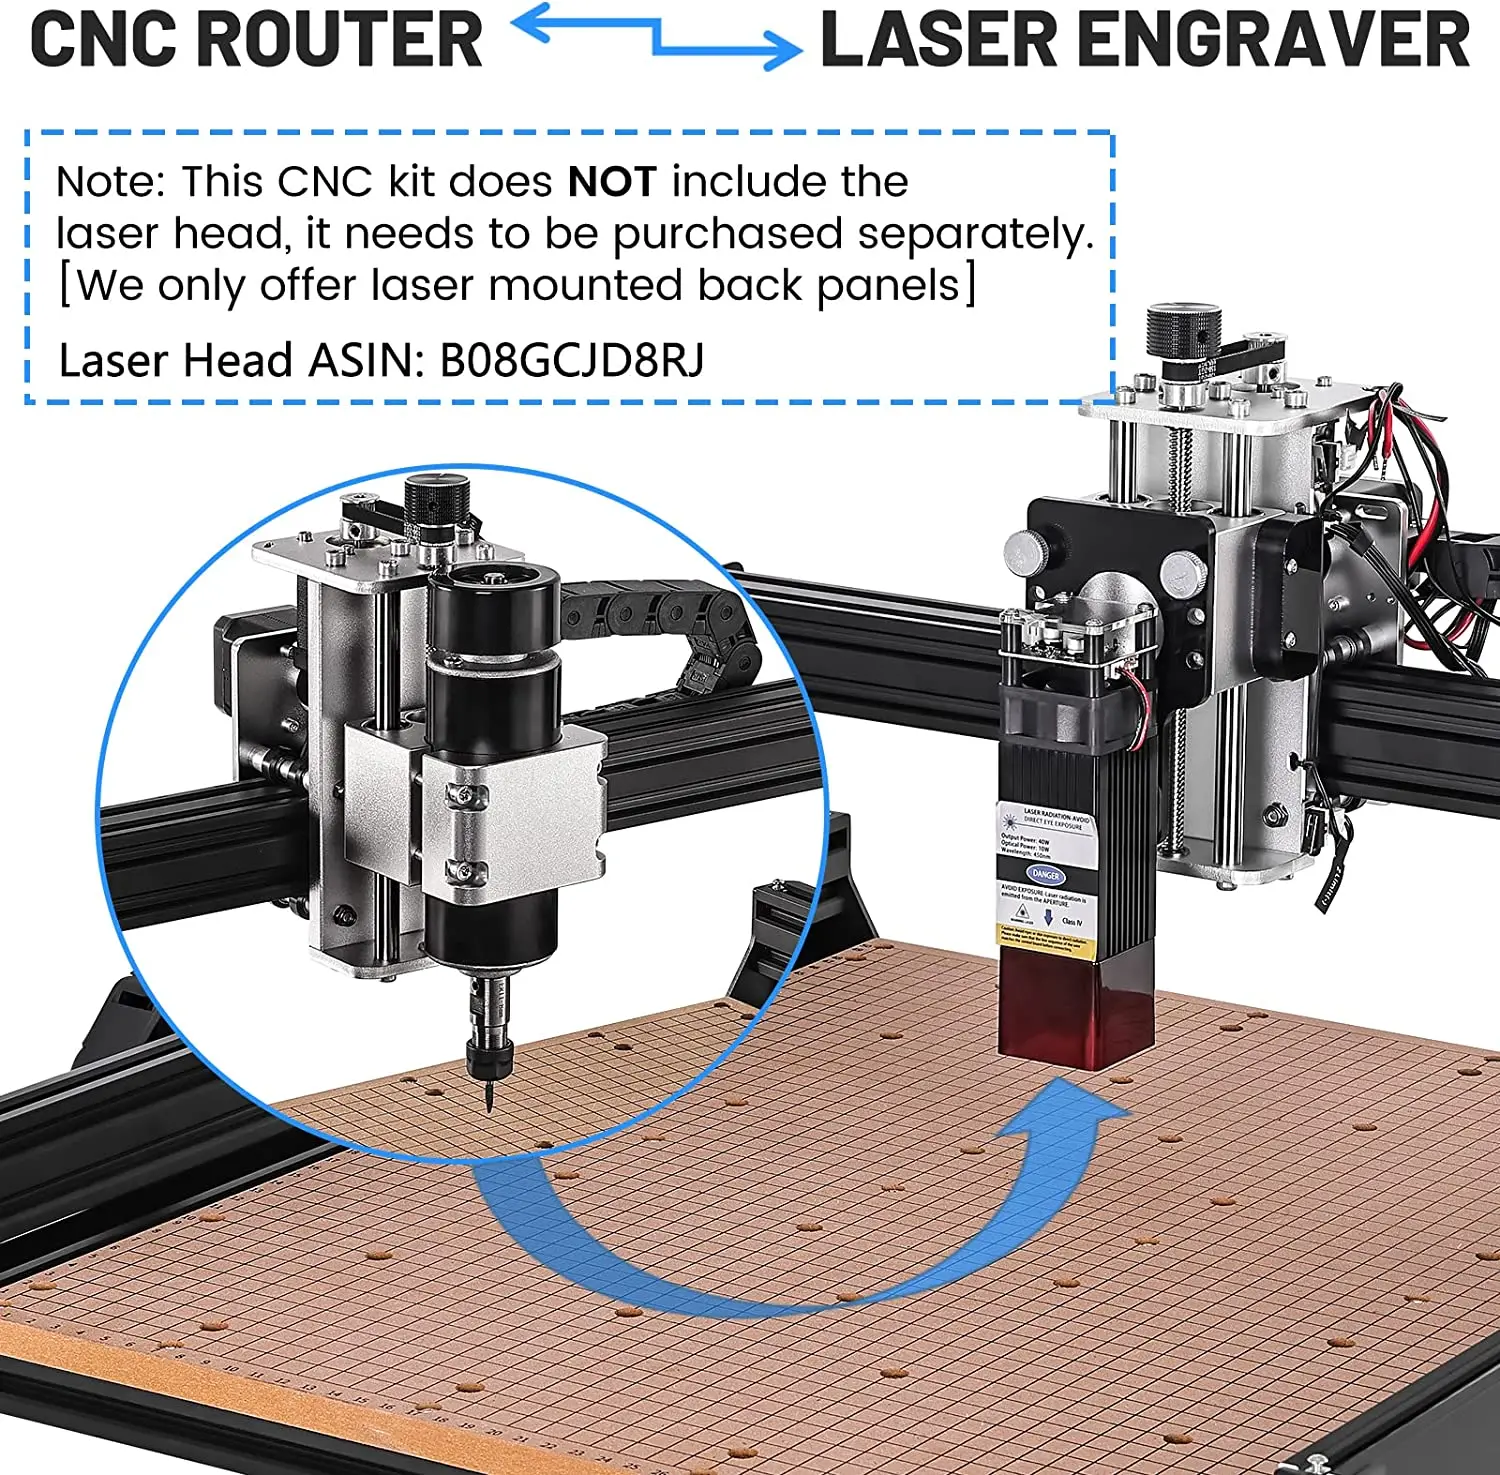 TWOWIN 500W CNC Router Laser Engraving Machine Milling Drilling Engraver Woodworking Cutter Wood LatheTools Work Area 430*390mm enlarge